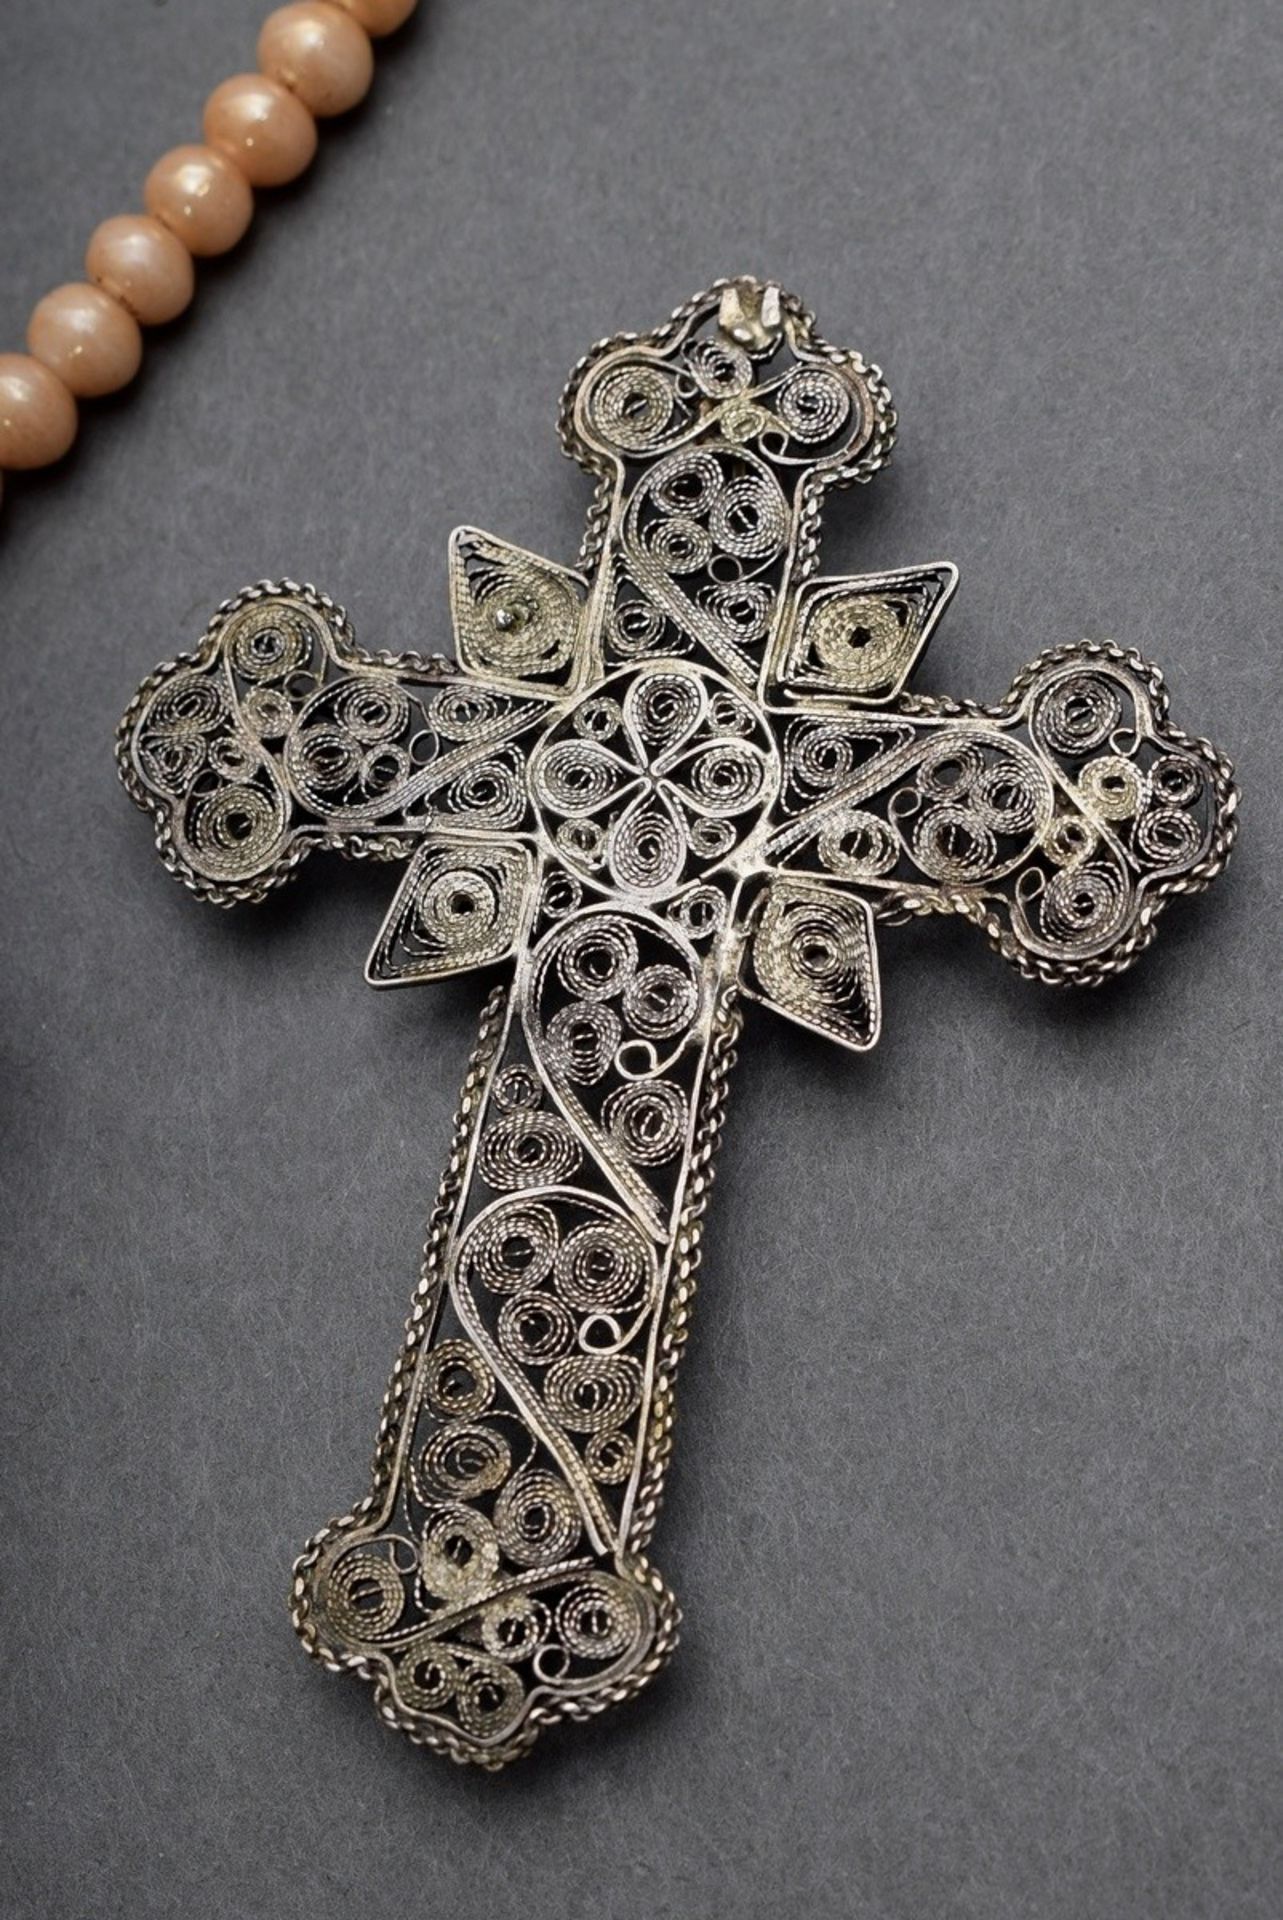 3 Various silver filigree works: Rosary fragment with glass beads (l. 26cm), crucifix (8x6cm) and f - Image 3 of 7